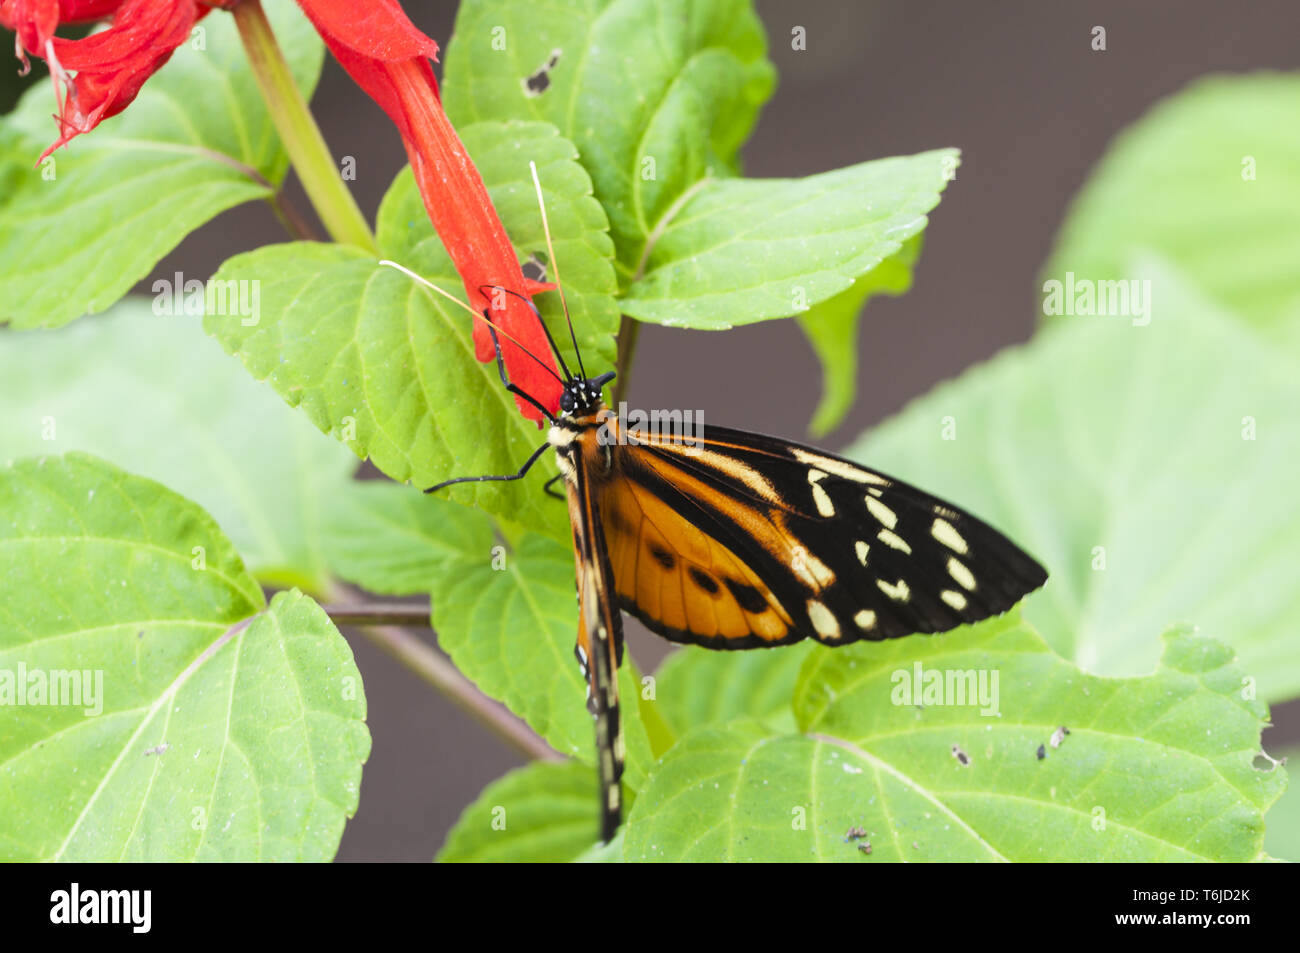 Butterfly, lepidoptera, Passion butterfly, Heliconius Stock Photo